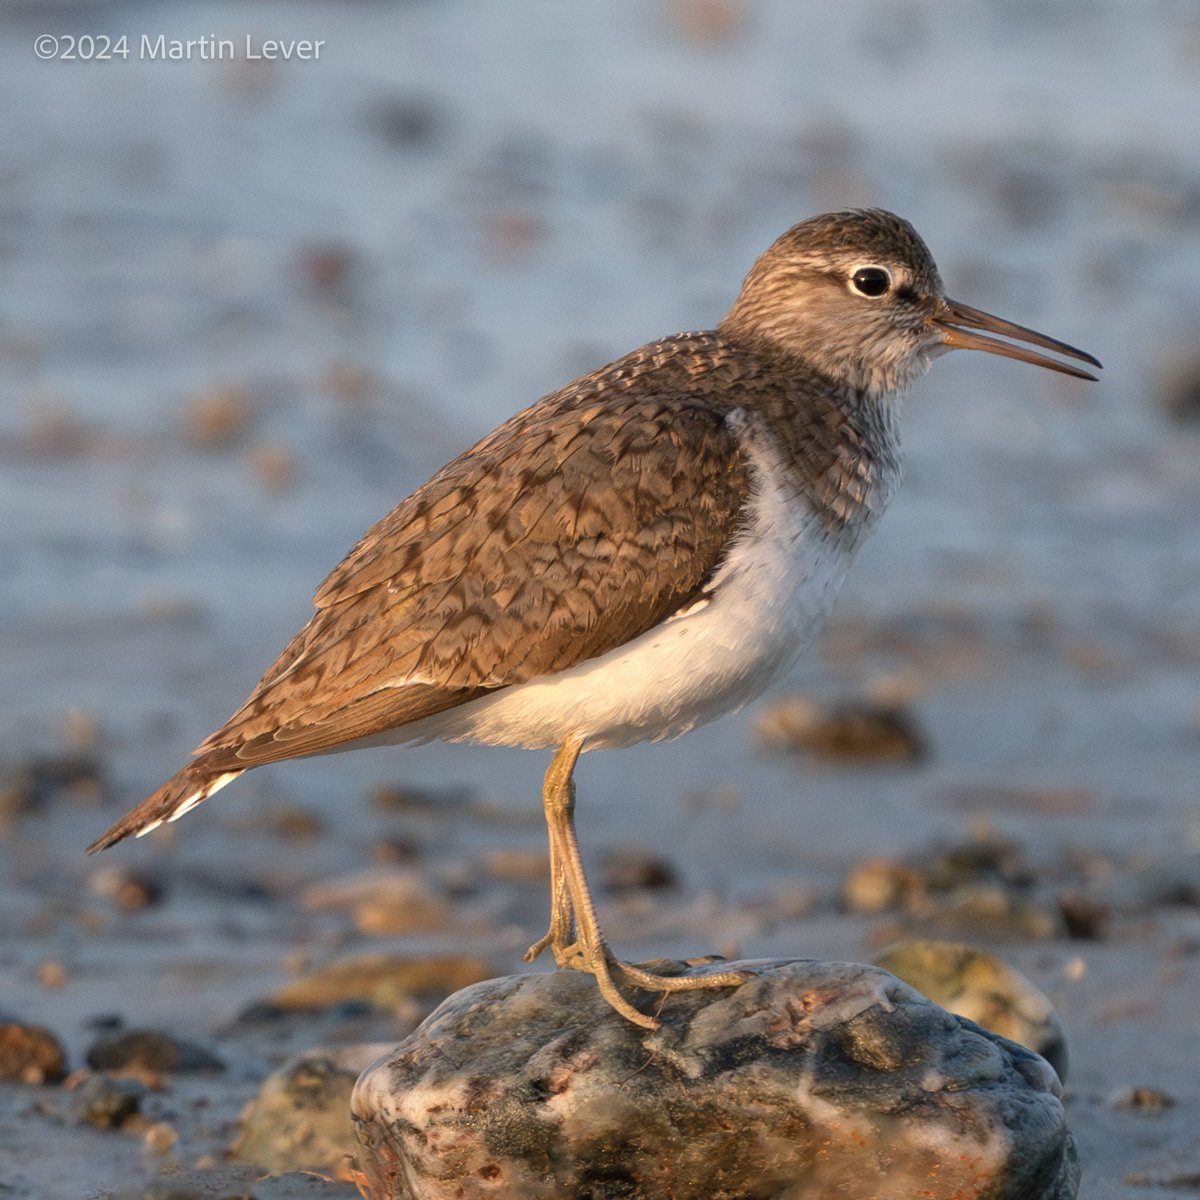 #CommonSandpiper, first light at Ettrick Bay, #Bute.